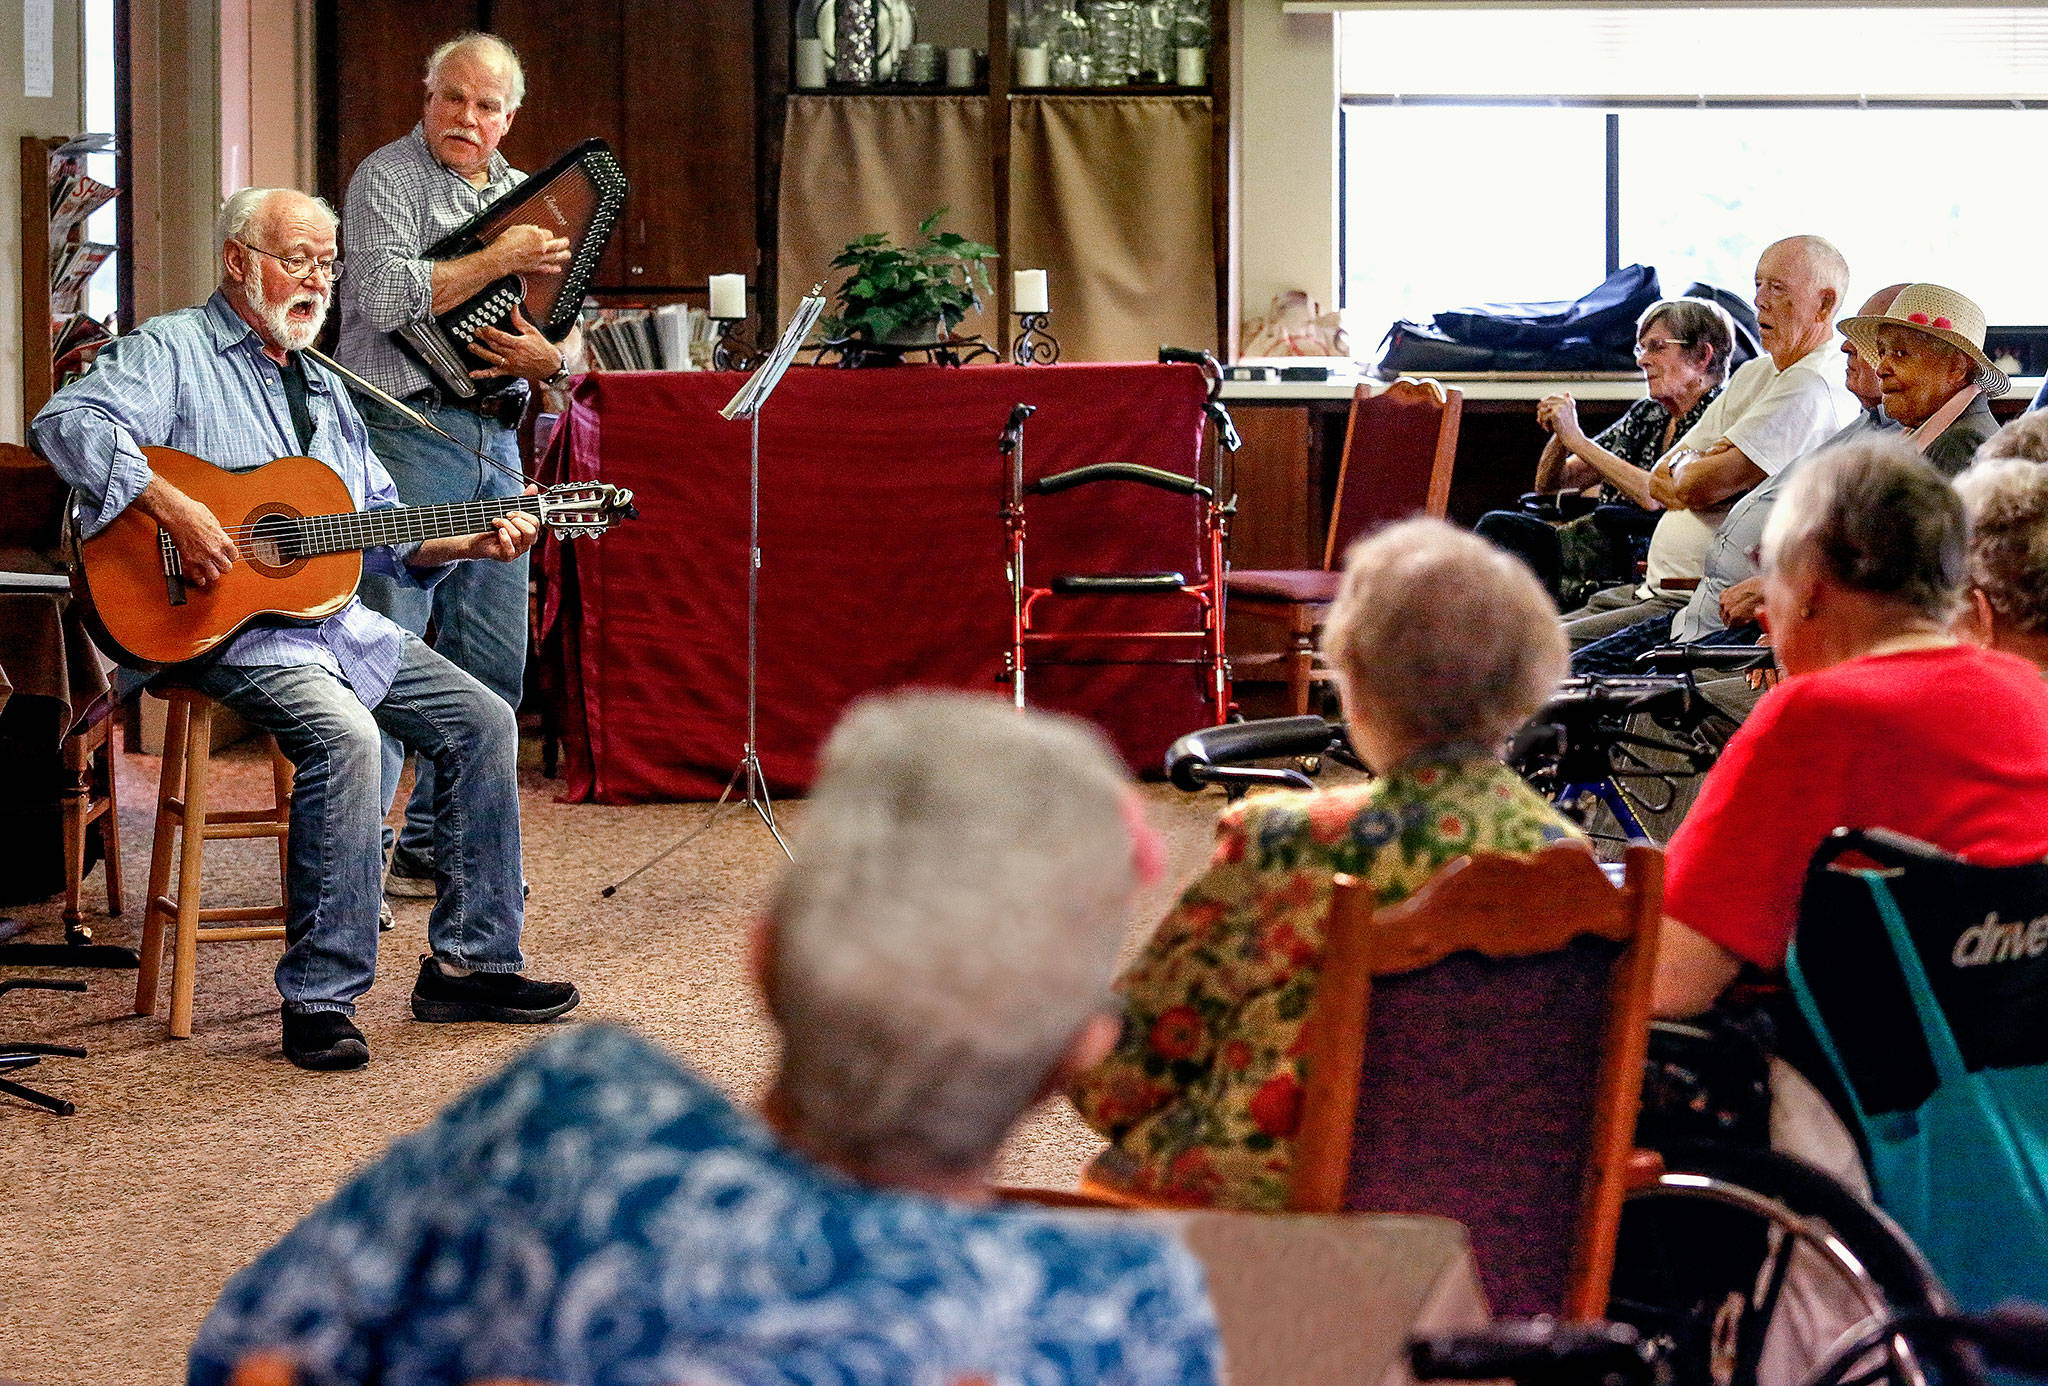 Folksingers Bob Nelson (left) and Bruce Baker perform Tuesday for residents of Sunrise View retirement community in Everett. Nelson and his wife, Judy, recently moved to Sunrise View. (Dan Bates / The Herald)